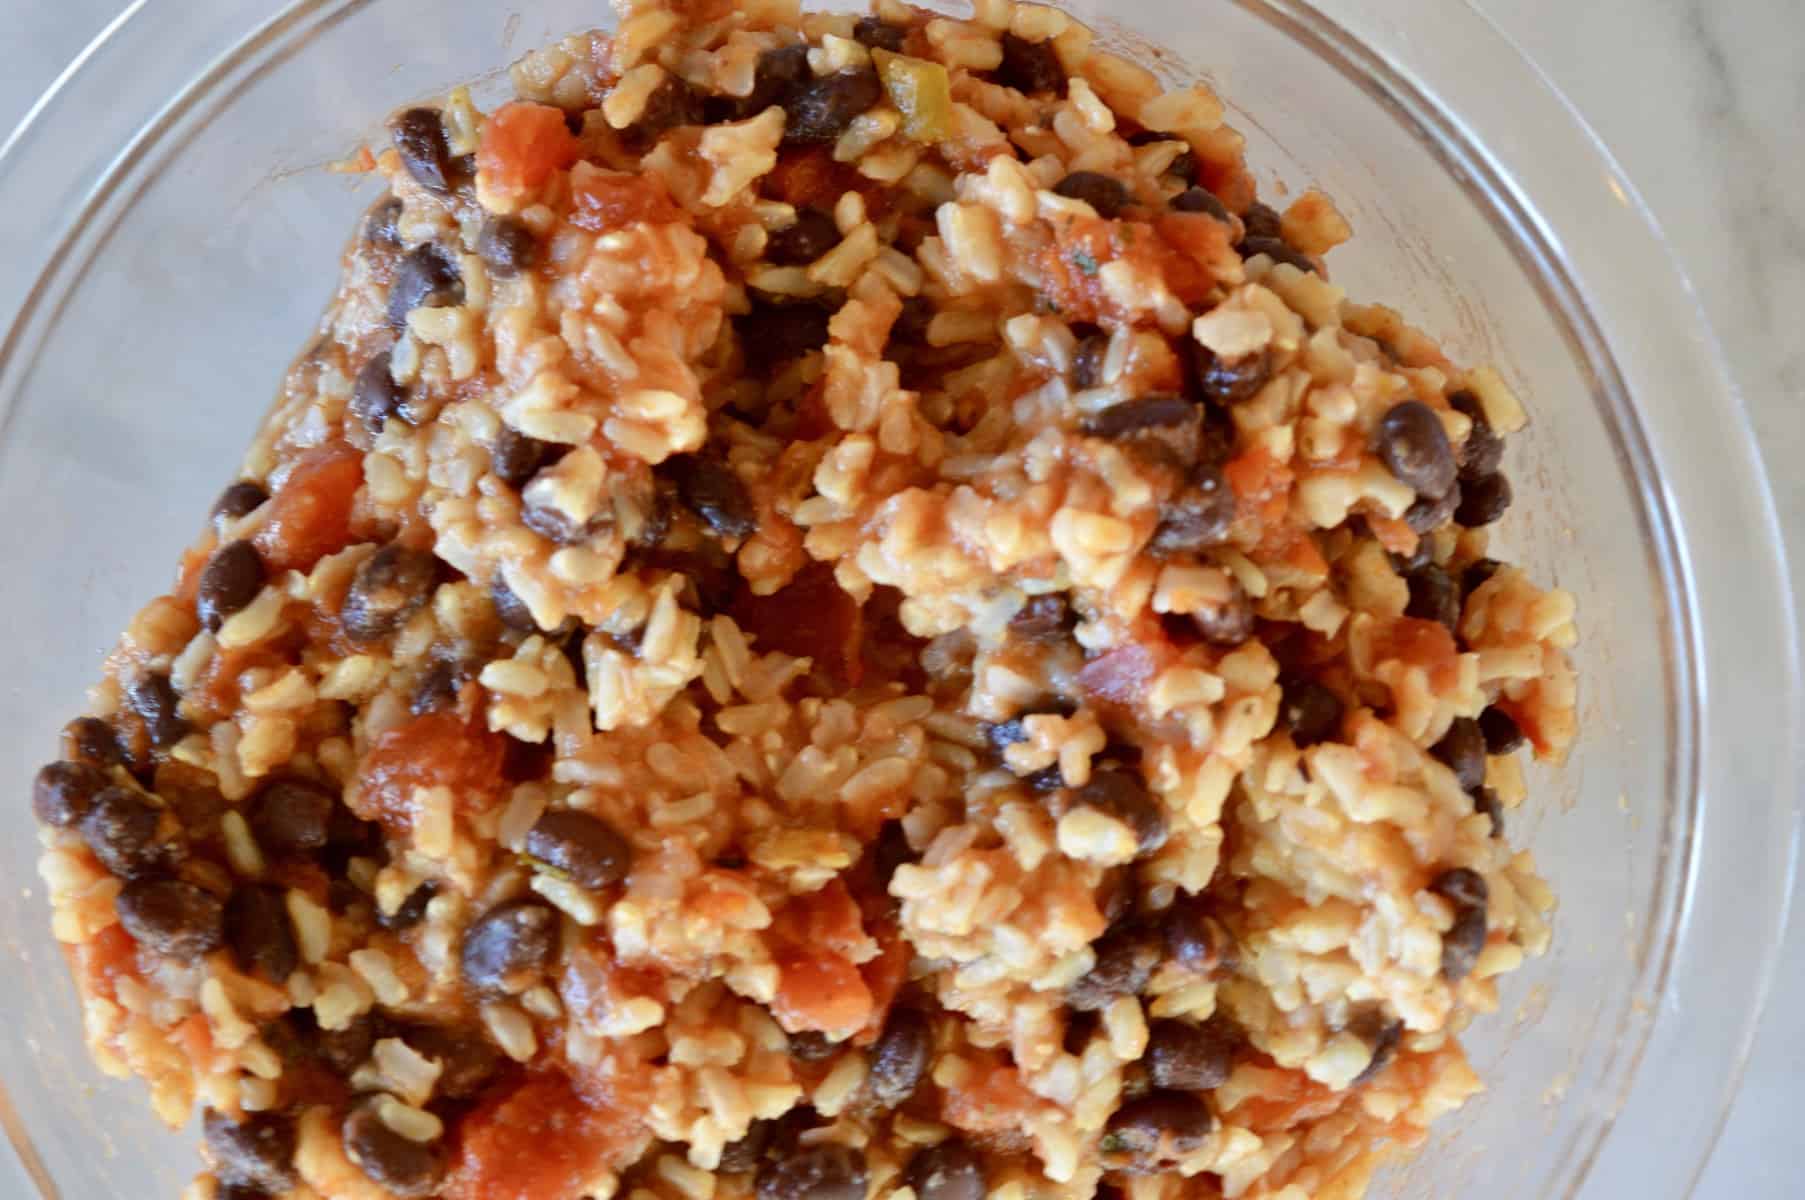 healthy Mexican rice made with brown rice, black beans, and salsa